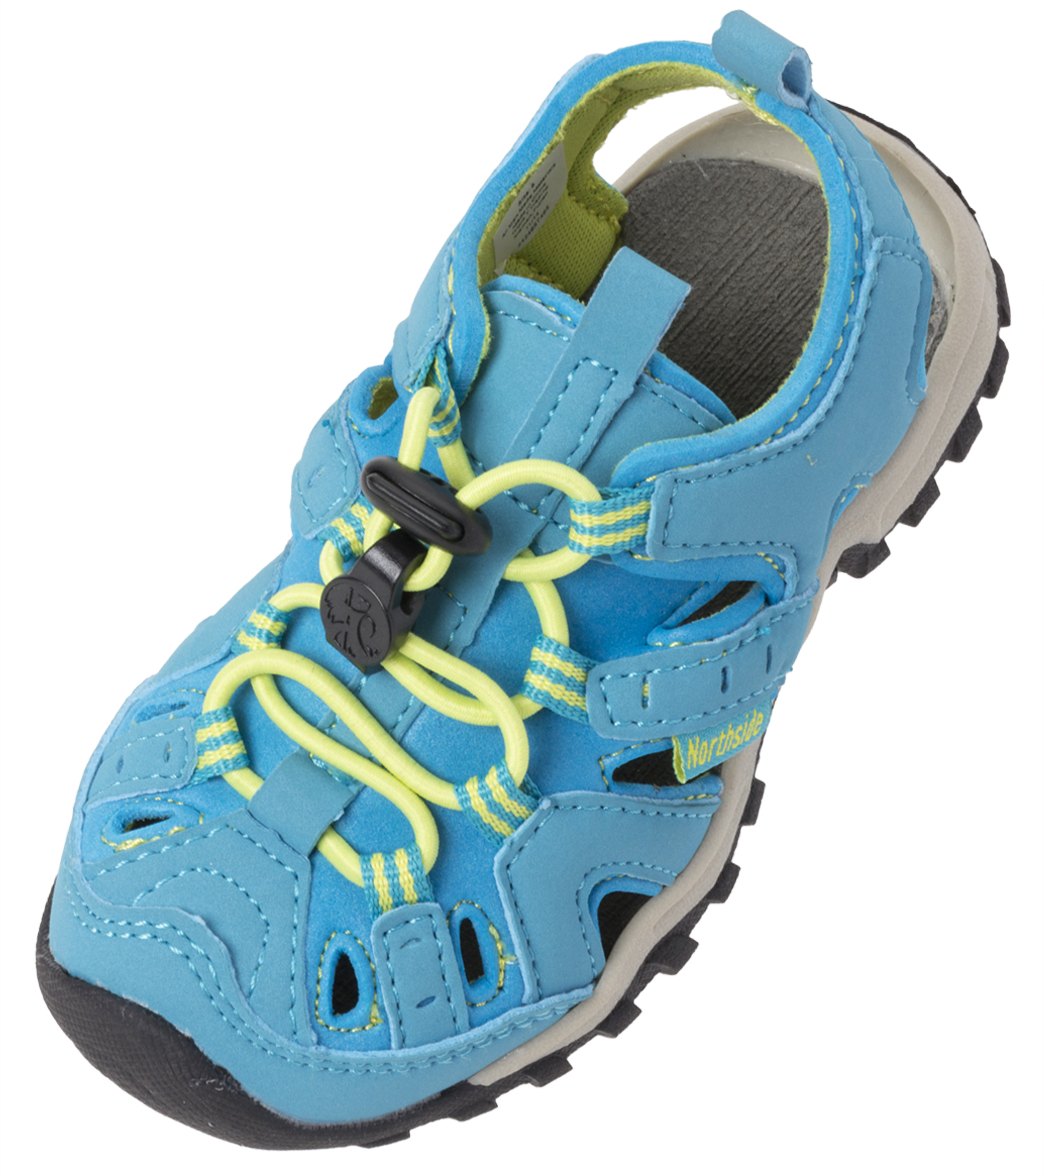 Northside Girls' Burke Ii Water Shoes - Blue/Lime 10 Faux-Suede - Swimoutlet.com